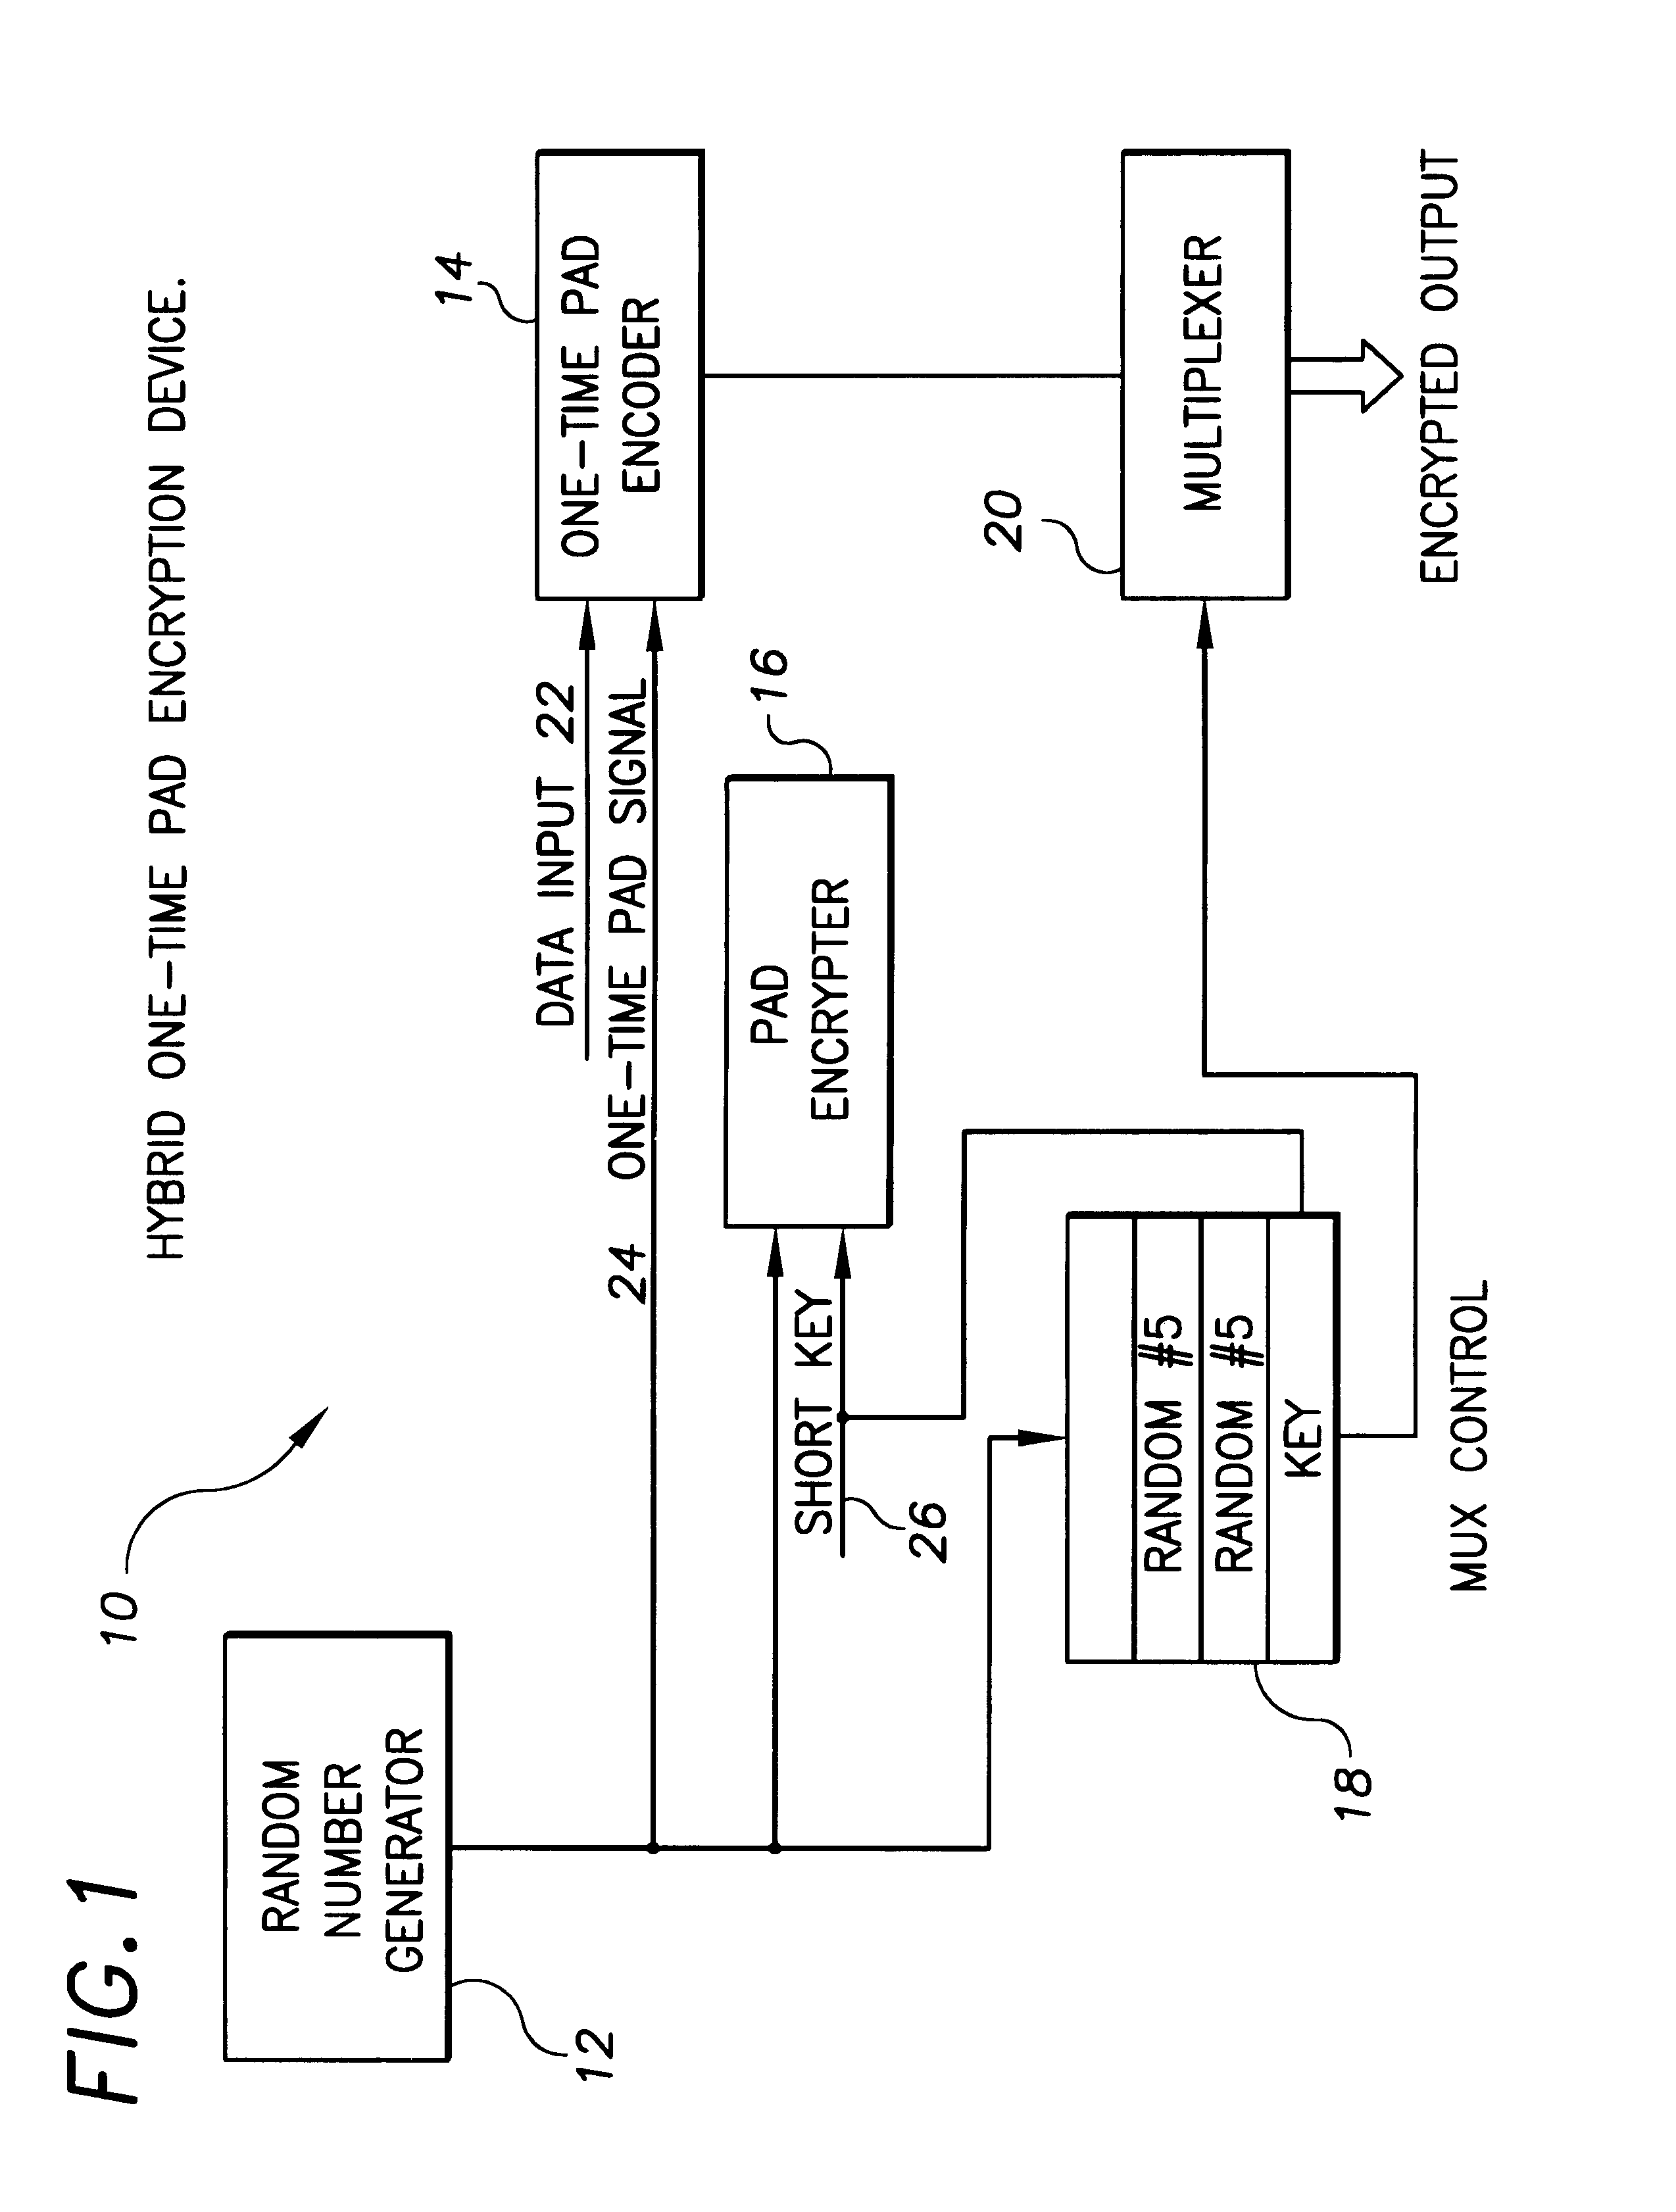 Hybrid one time pad encryption and decryption apparatus with methods for encrypting and decrypting data